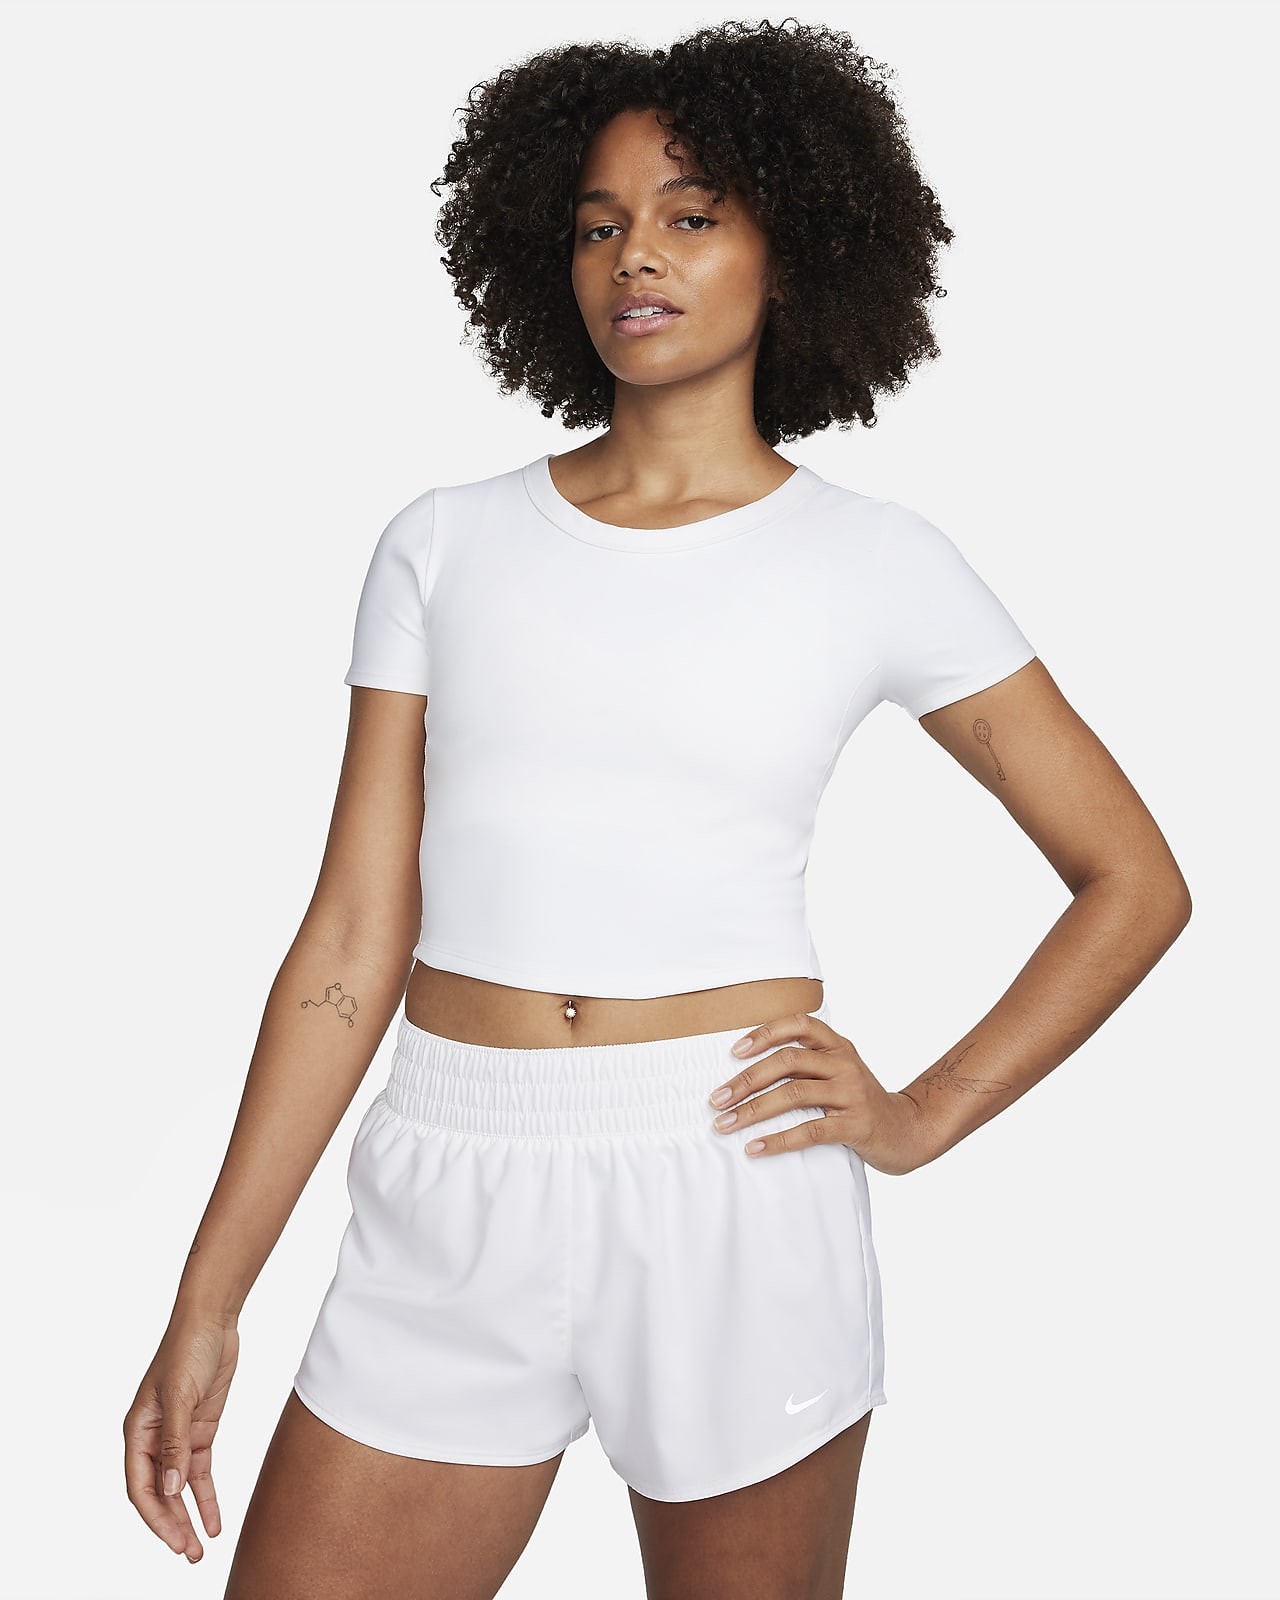 Nike One Fitted Women's Dri-FIT Short-Sleeve Cropped Top